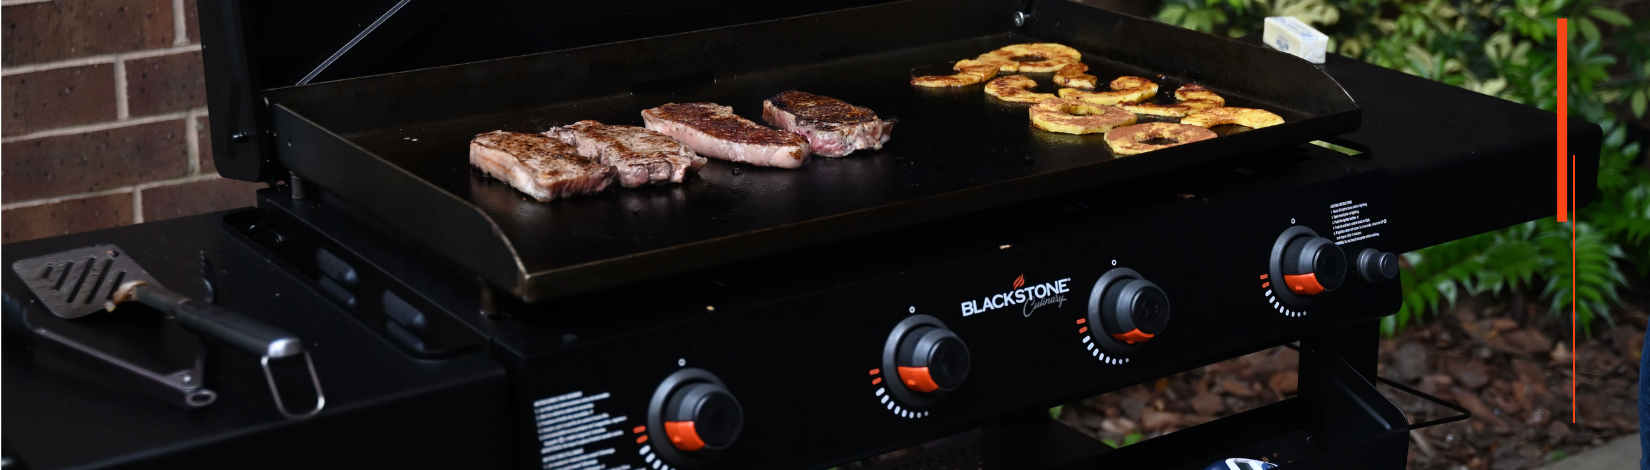 Steaks and pineapple on Blackstone Grill